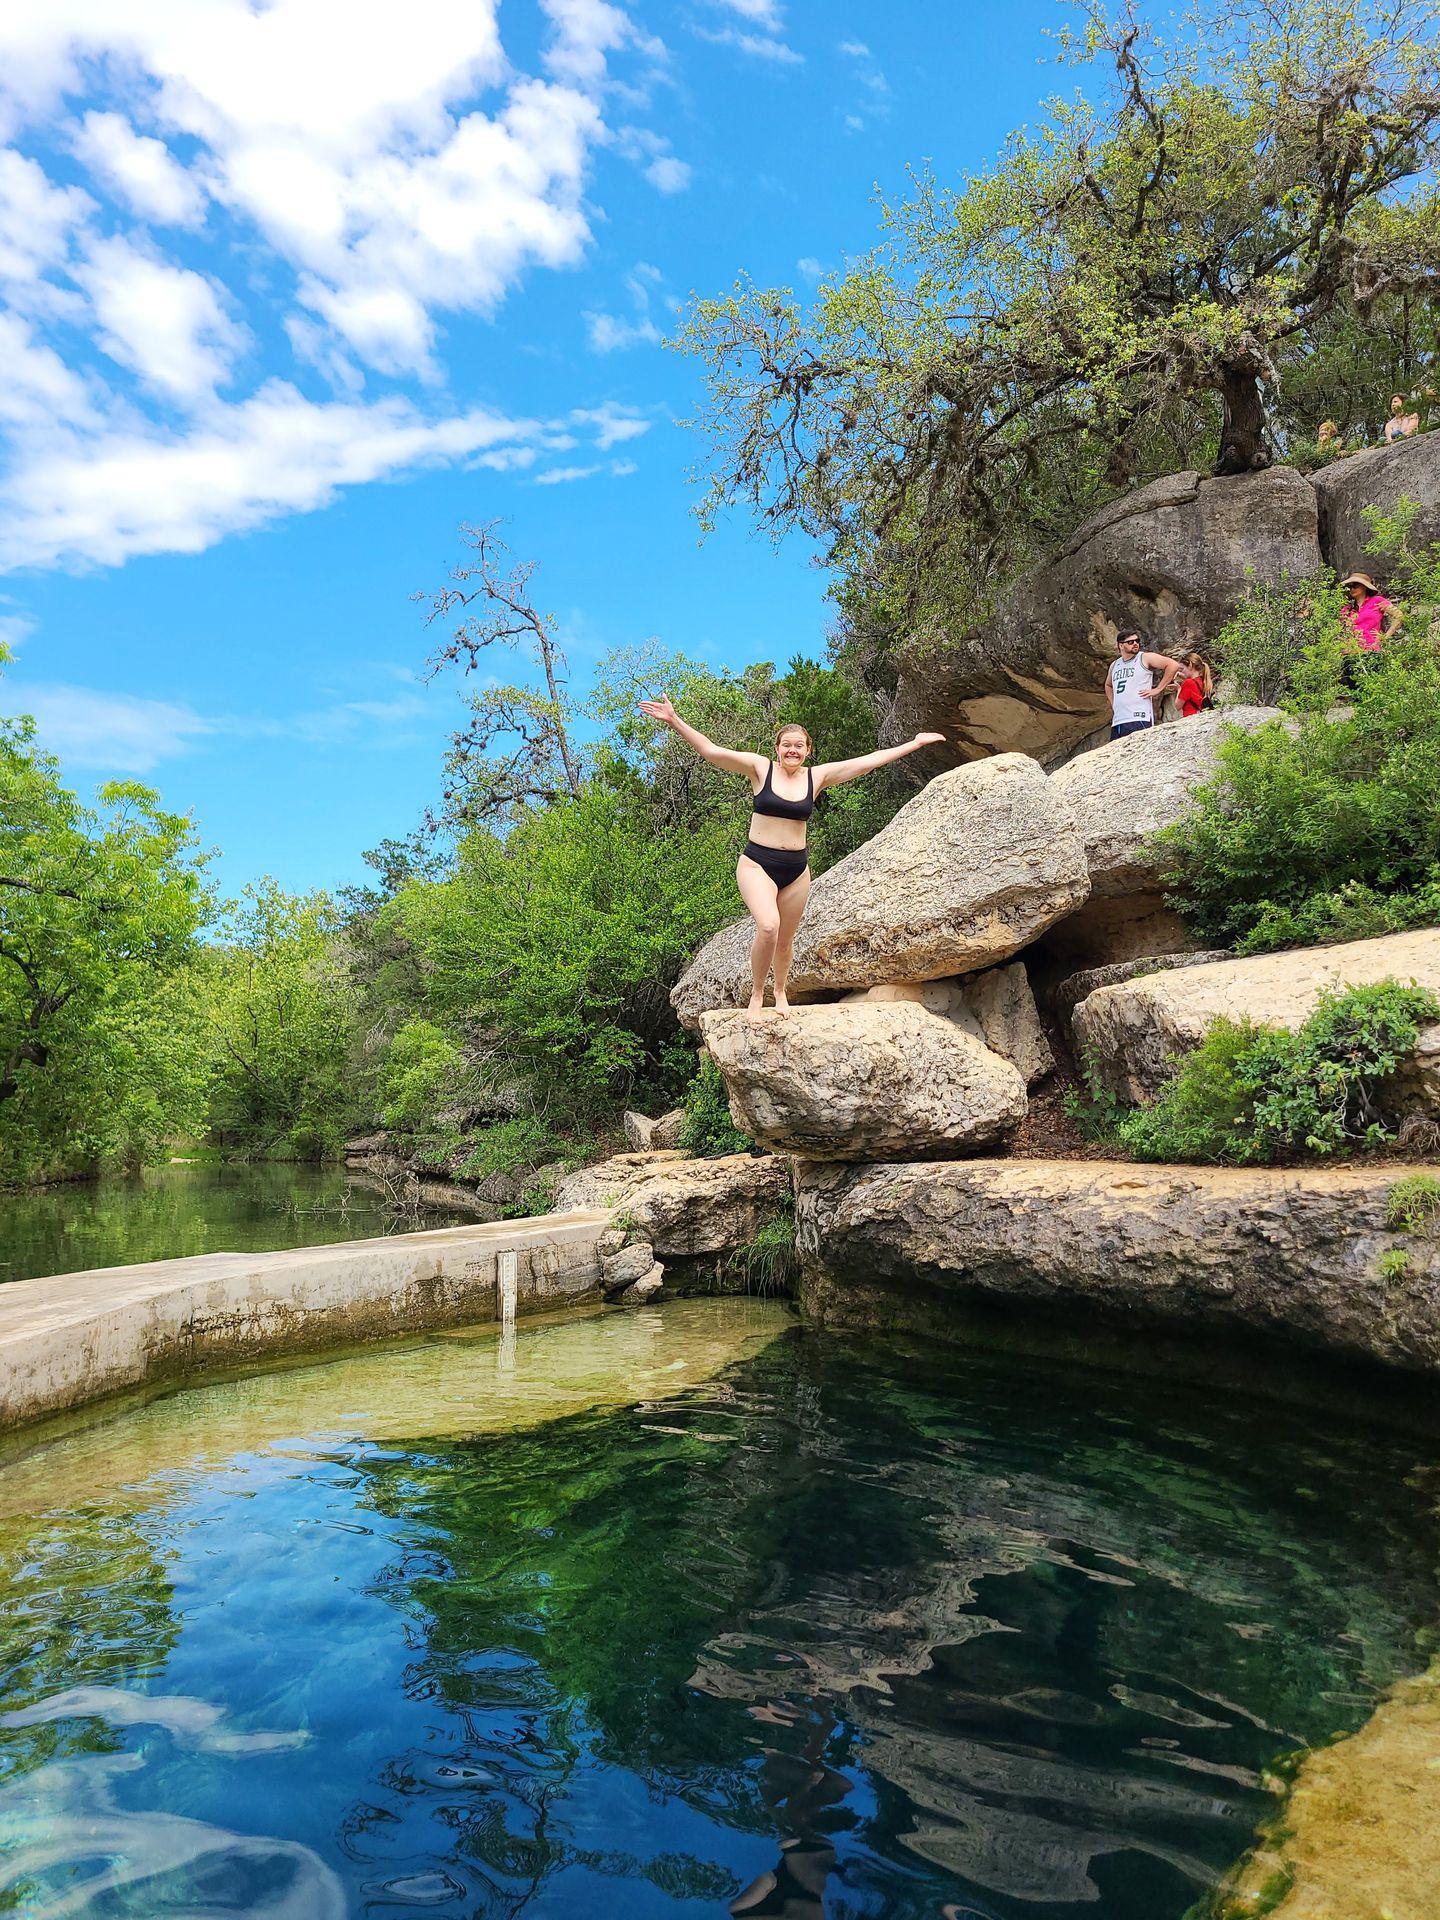 A view of Lydia about to jump into Jacob's Well from the ground.